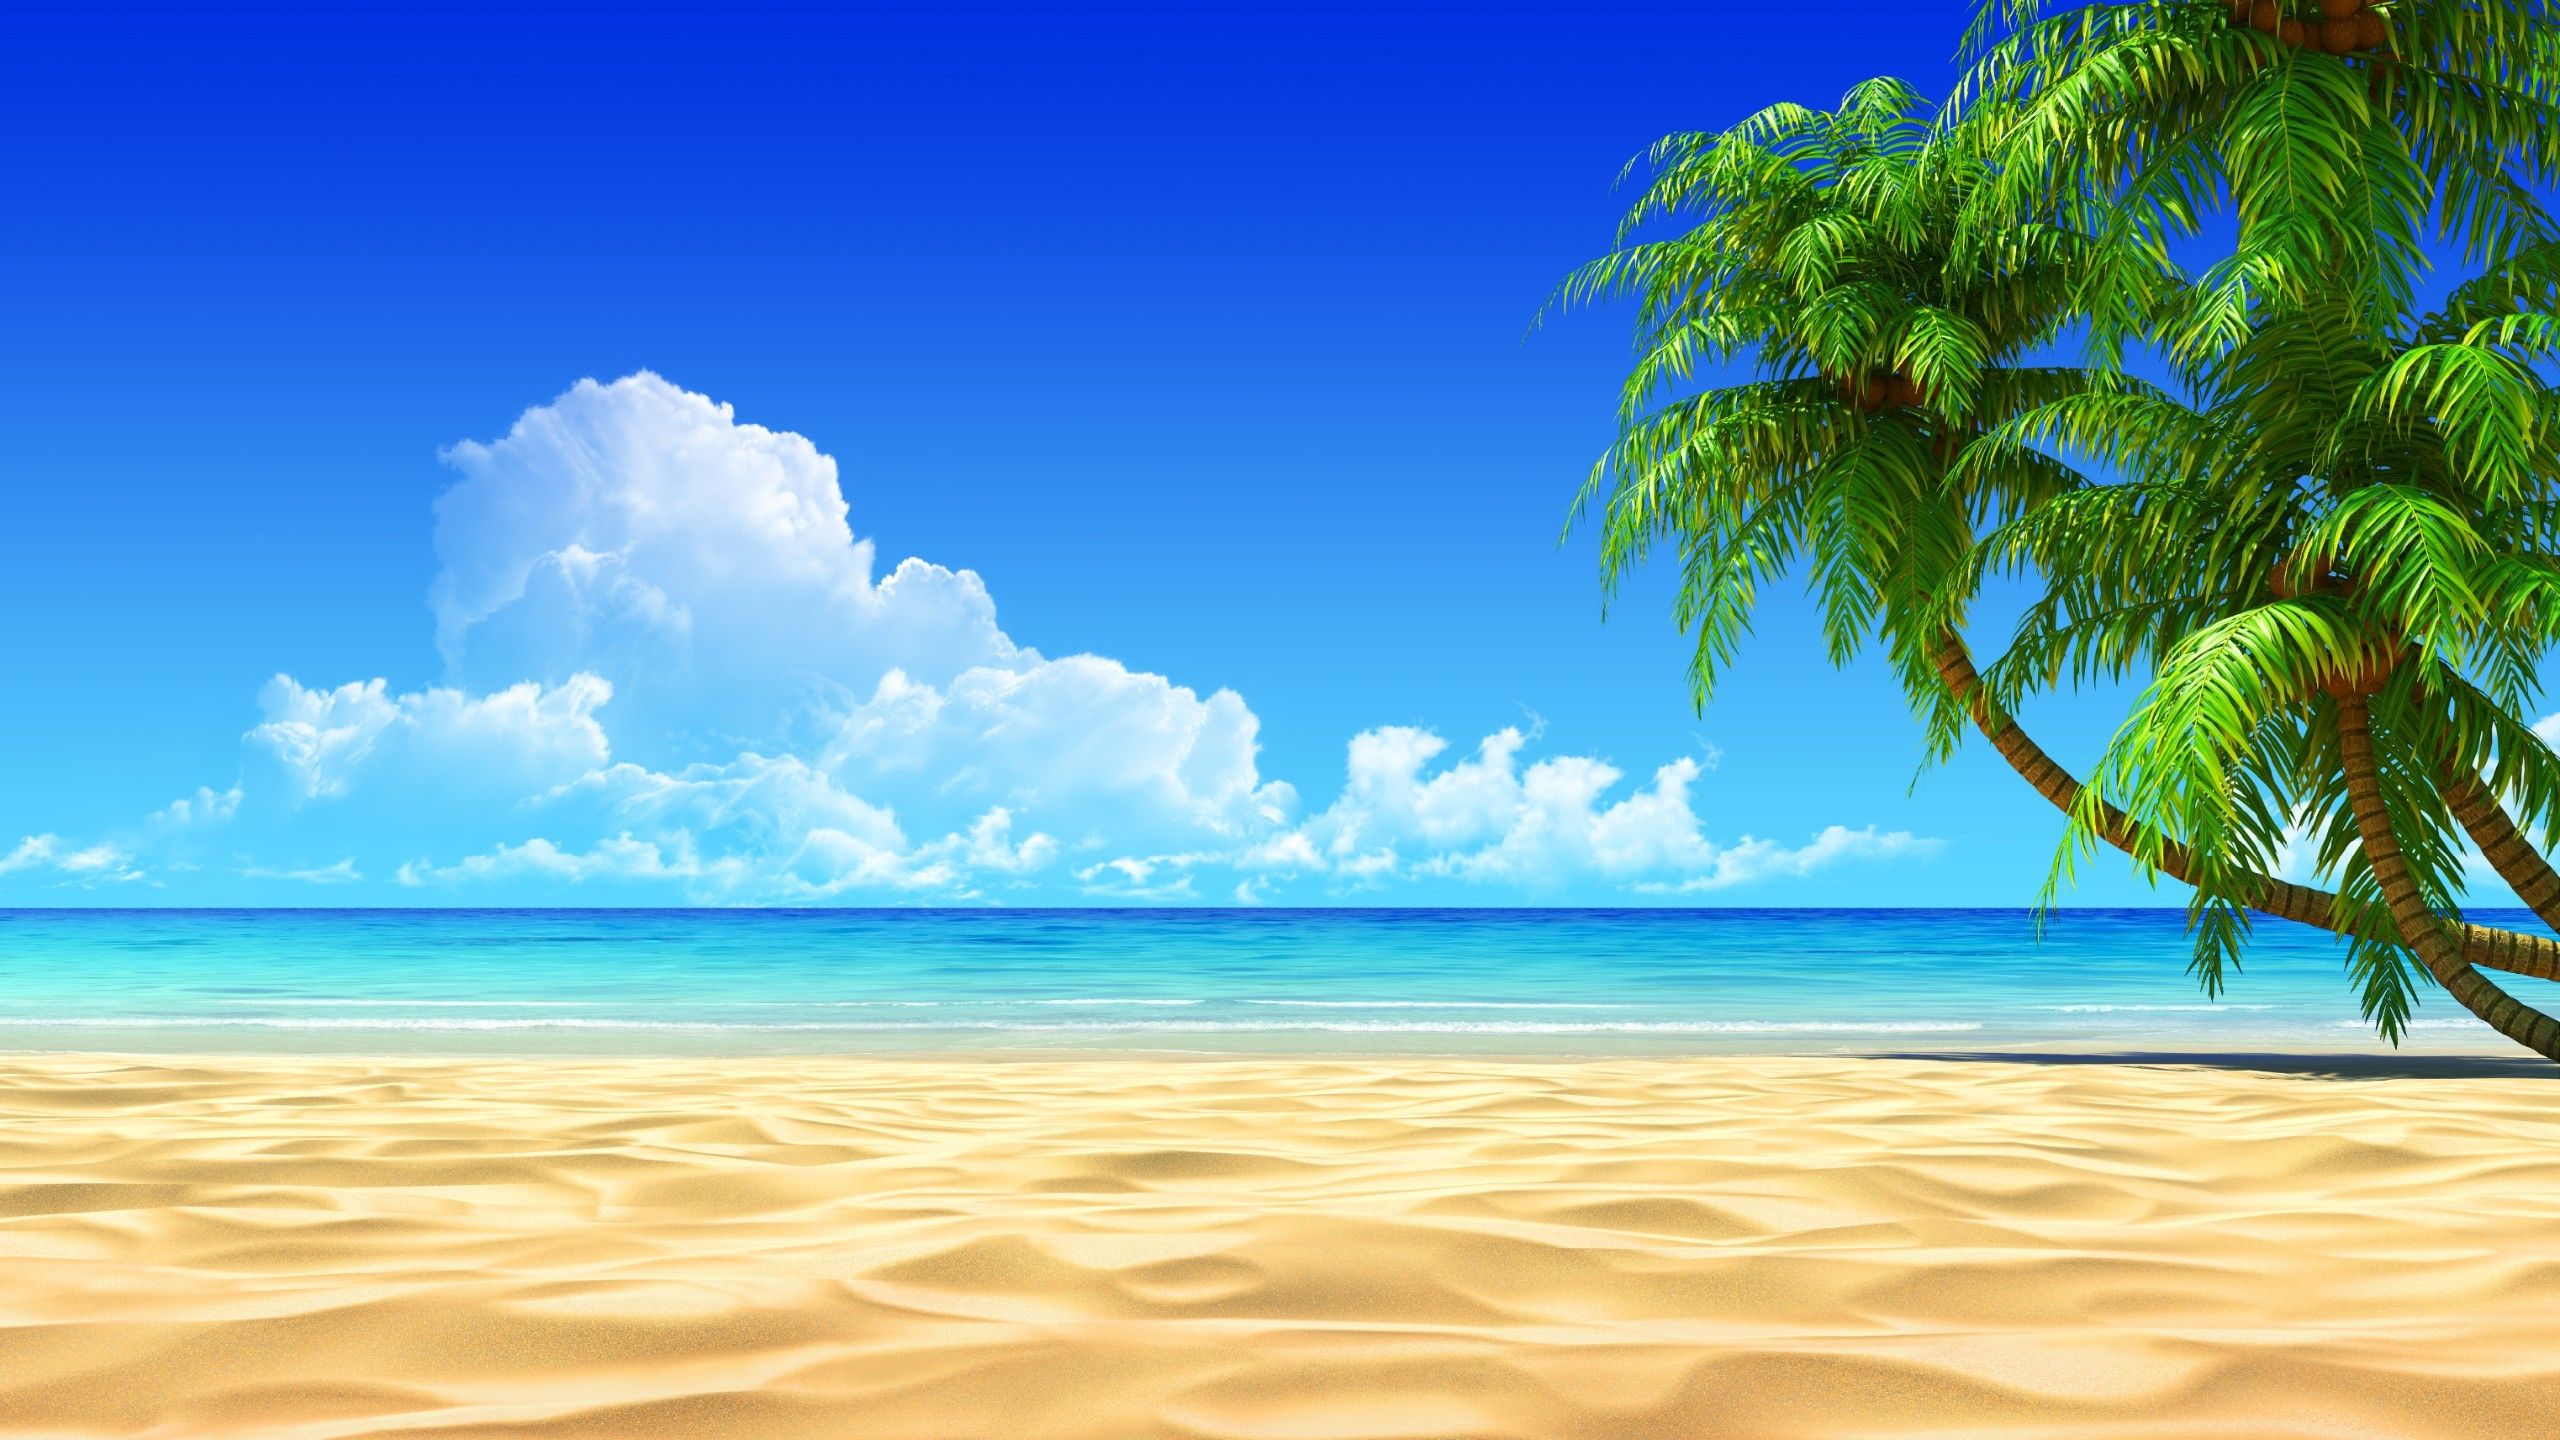 Wonderful Hawaii Wallpaper Background Picture